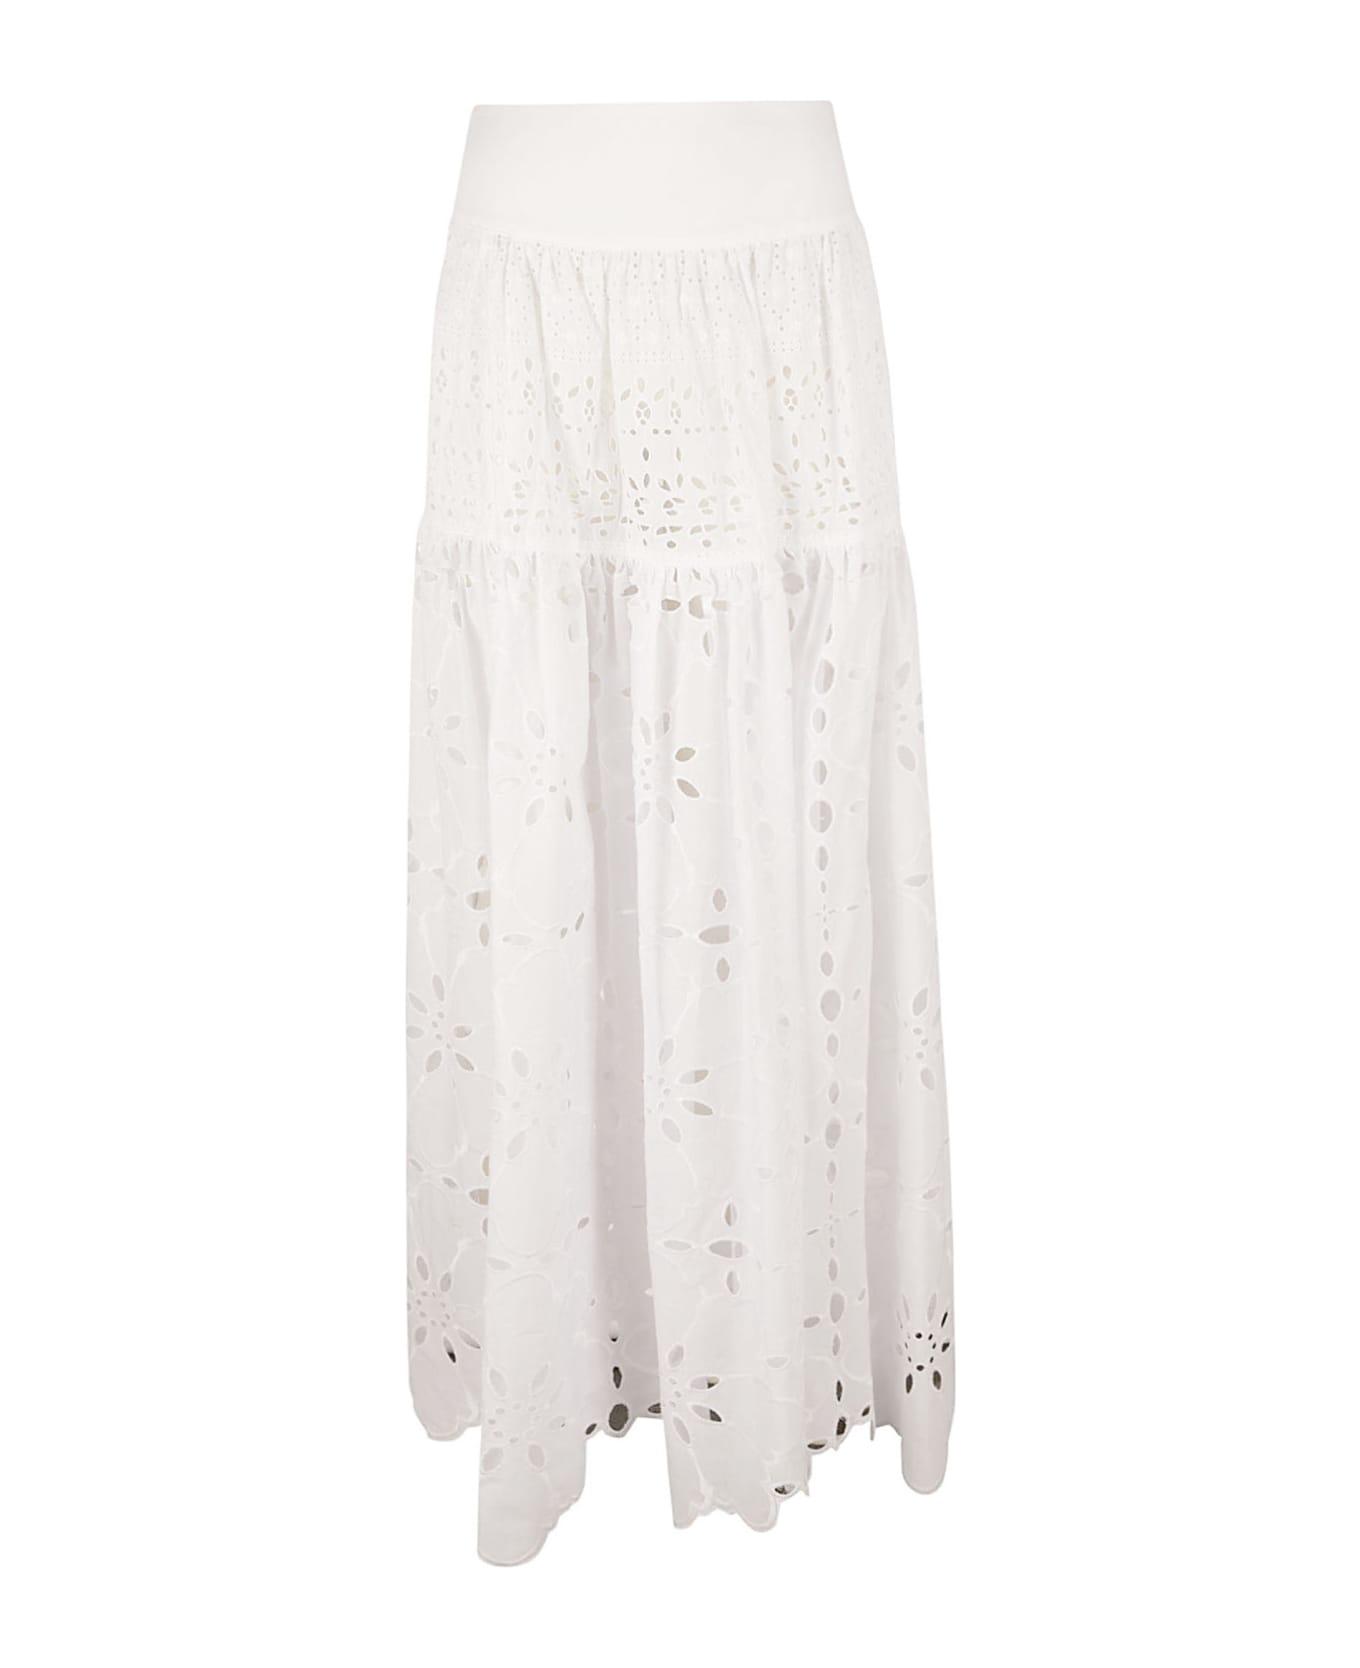 Ermanno Scervino High-waist Floral Perforated Skirt - White